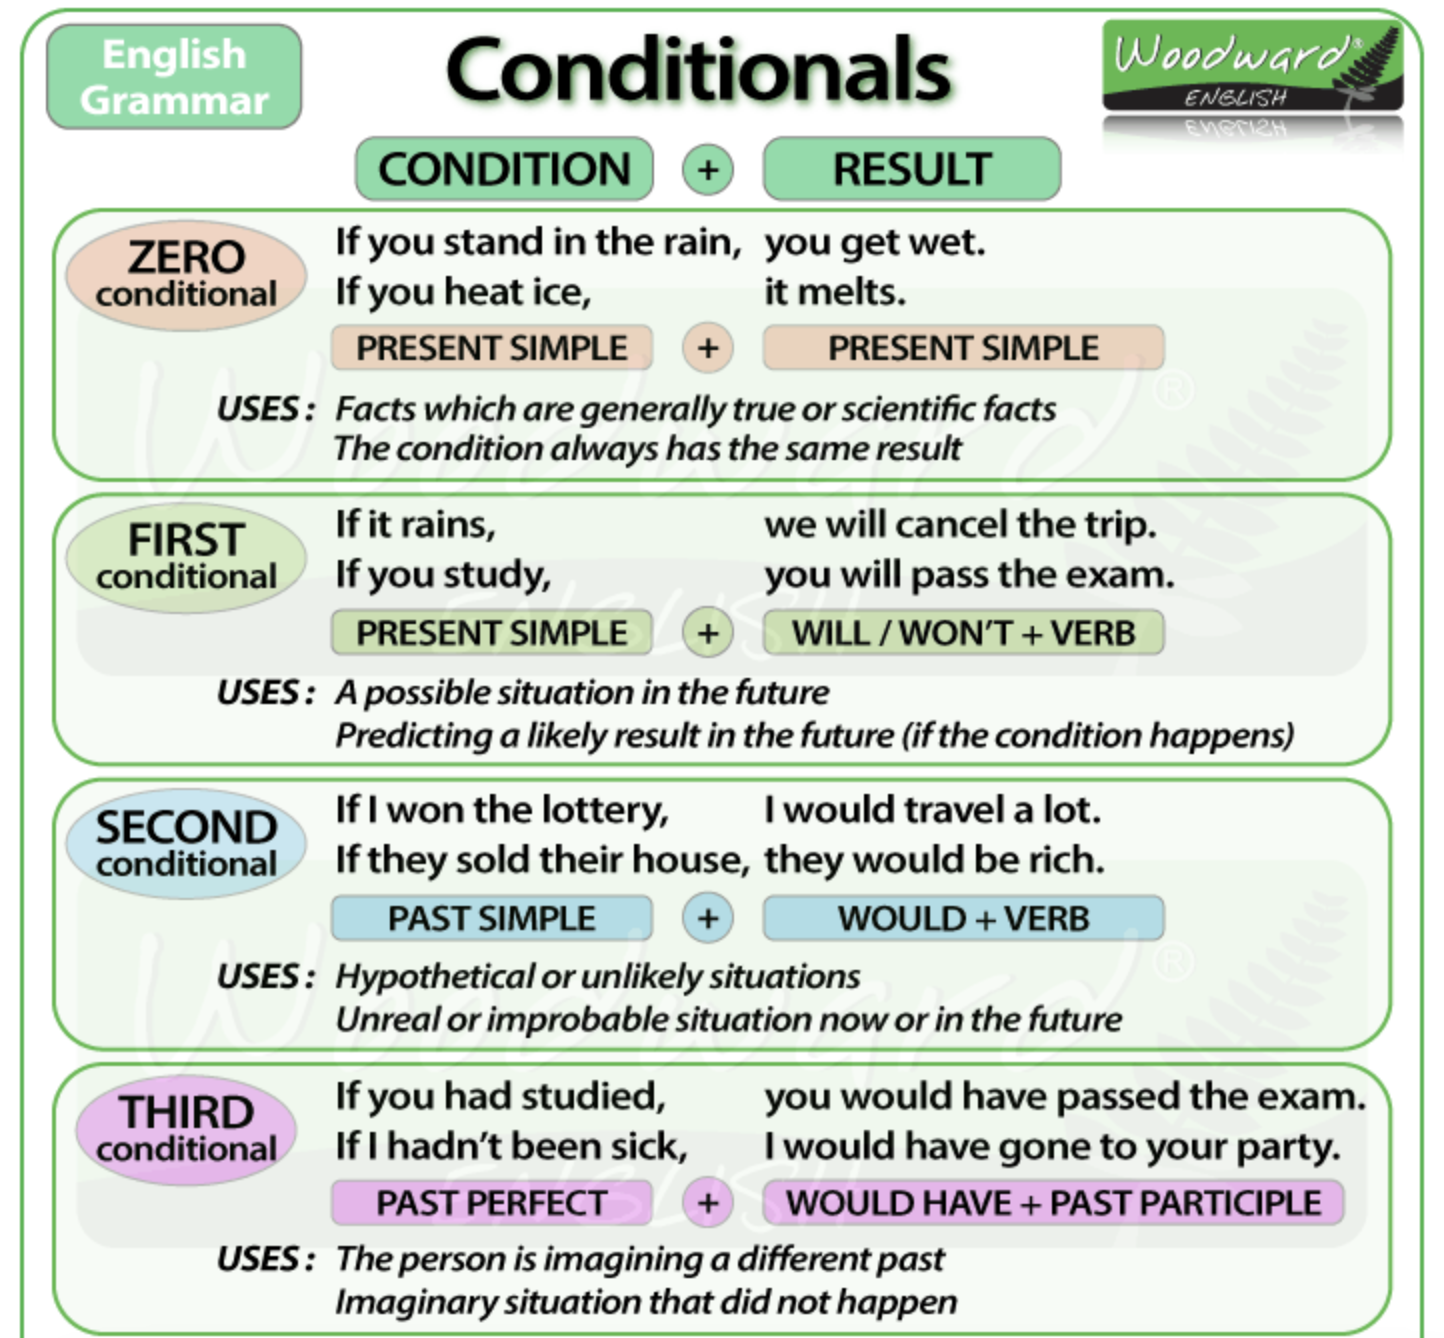 Give reply. Английский 0 1 2 3 conditional. Conditionals в английском 0 1 2. Conditionals в английском 2 3. 0-3 Conditional в английском языке.